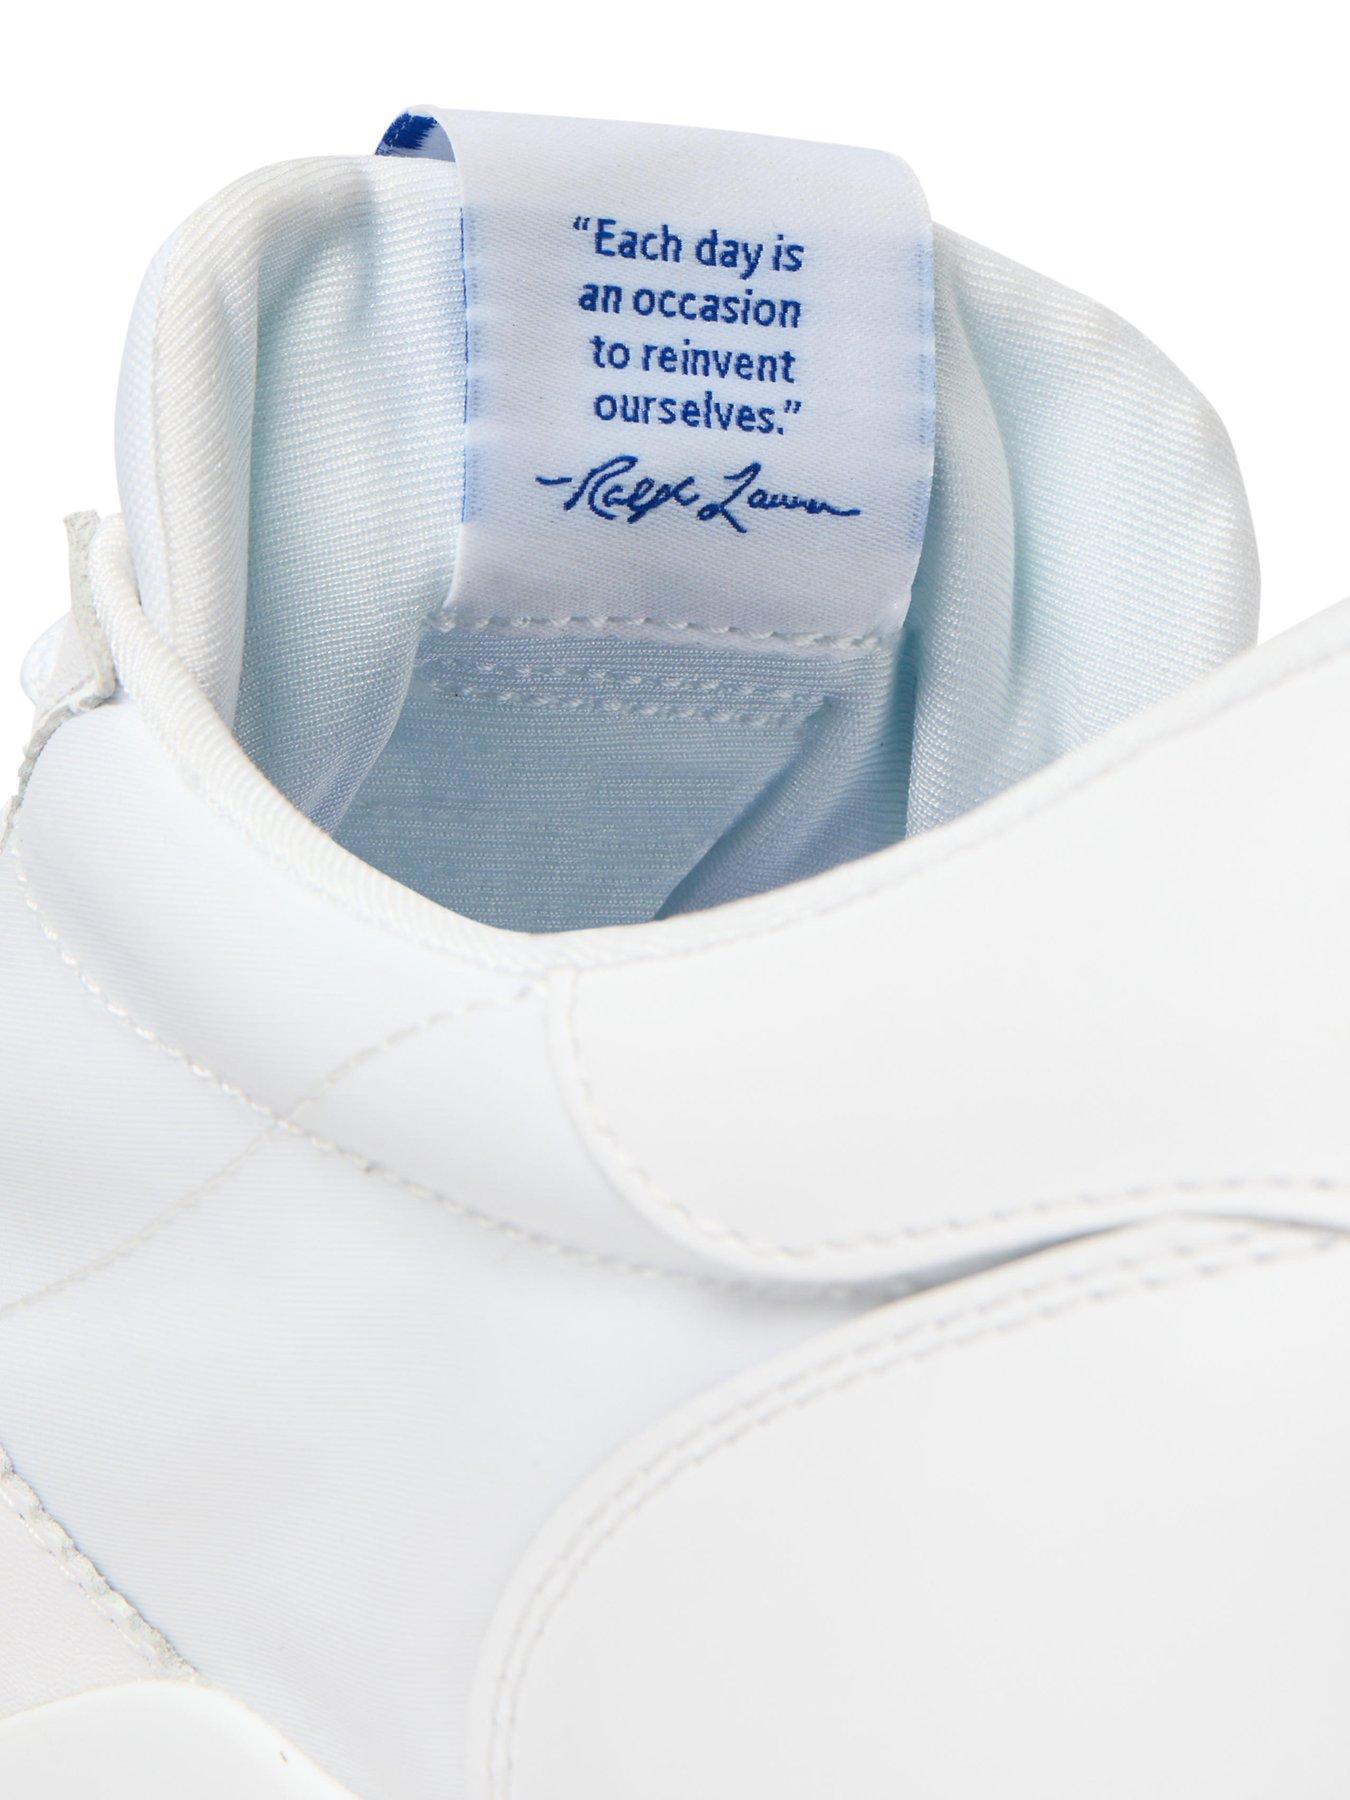 Polo Ralph Lauren Train 89 Pp Trainers - White | Very.co.uk